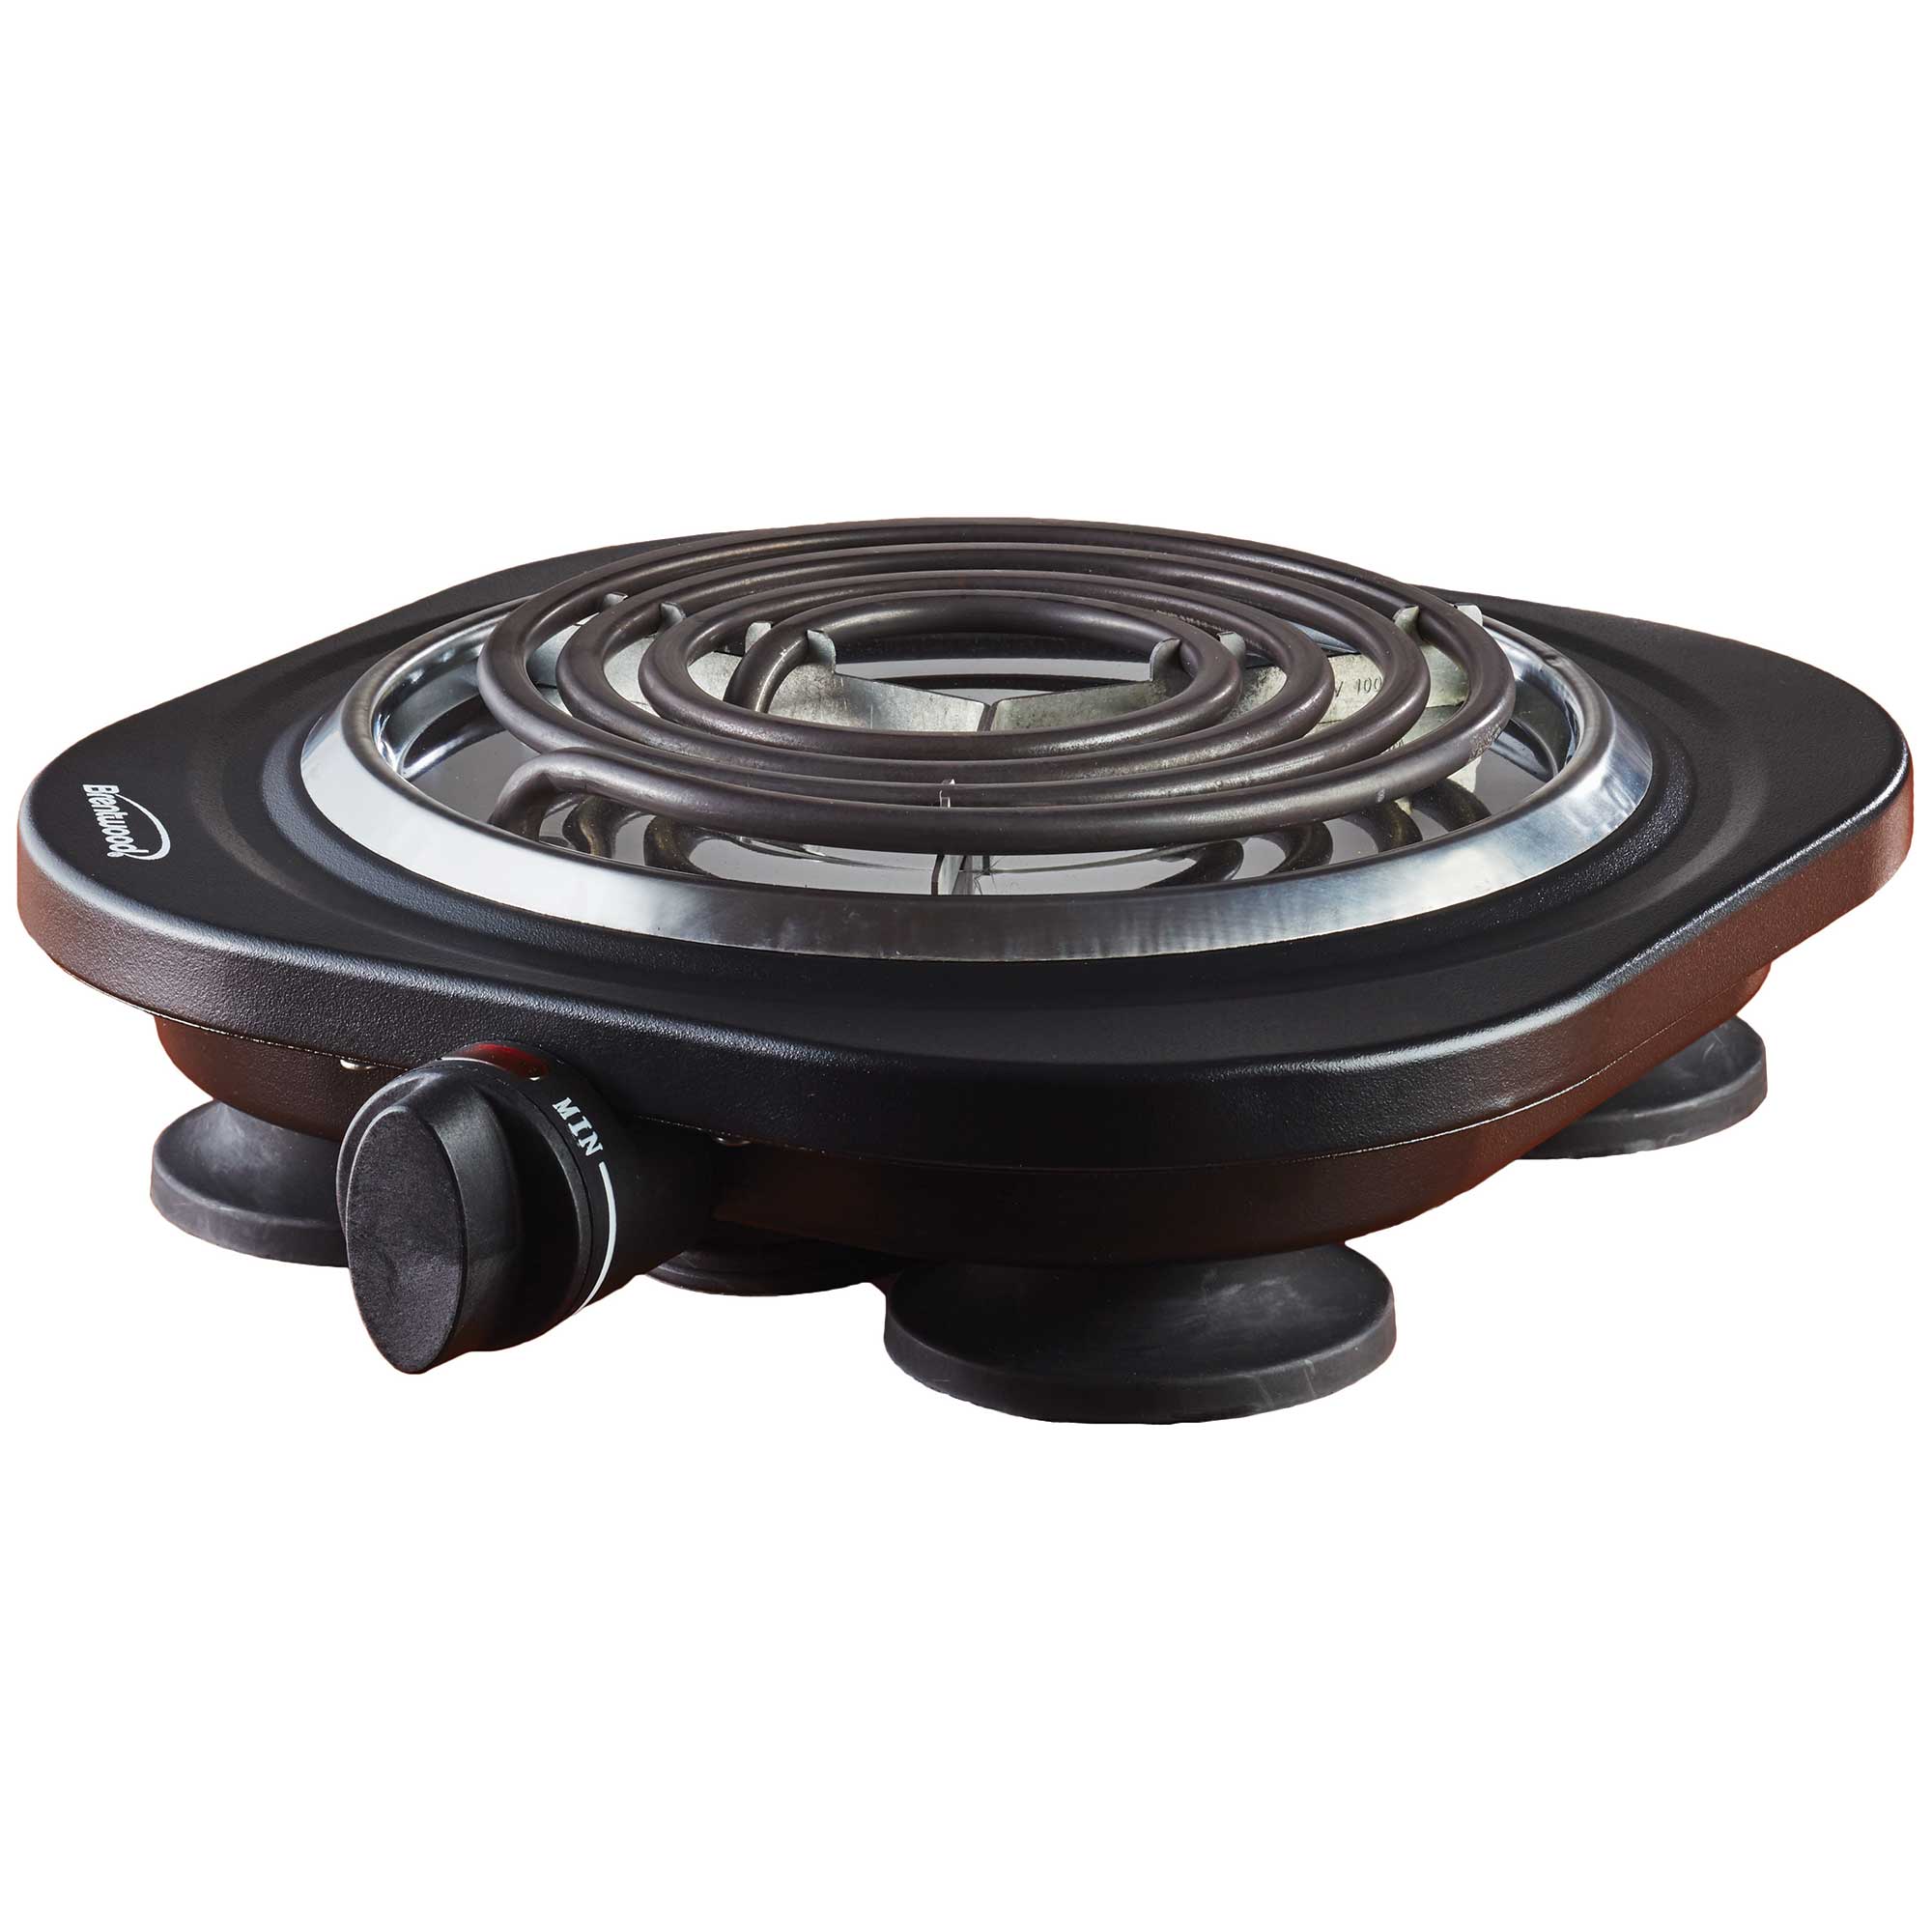 Portable electric stove single burner travel compact small hot plate black